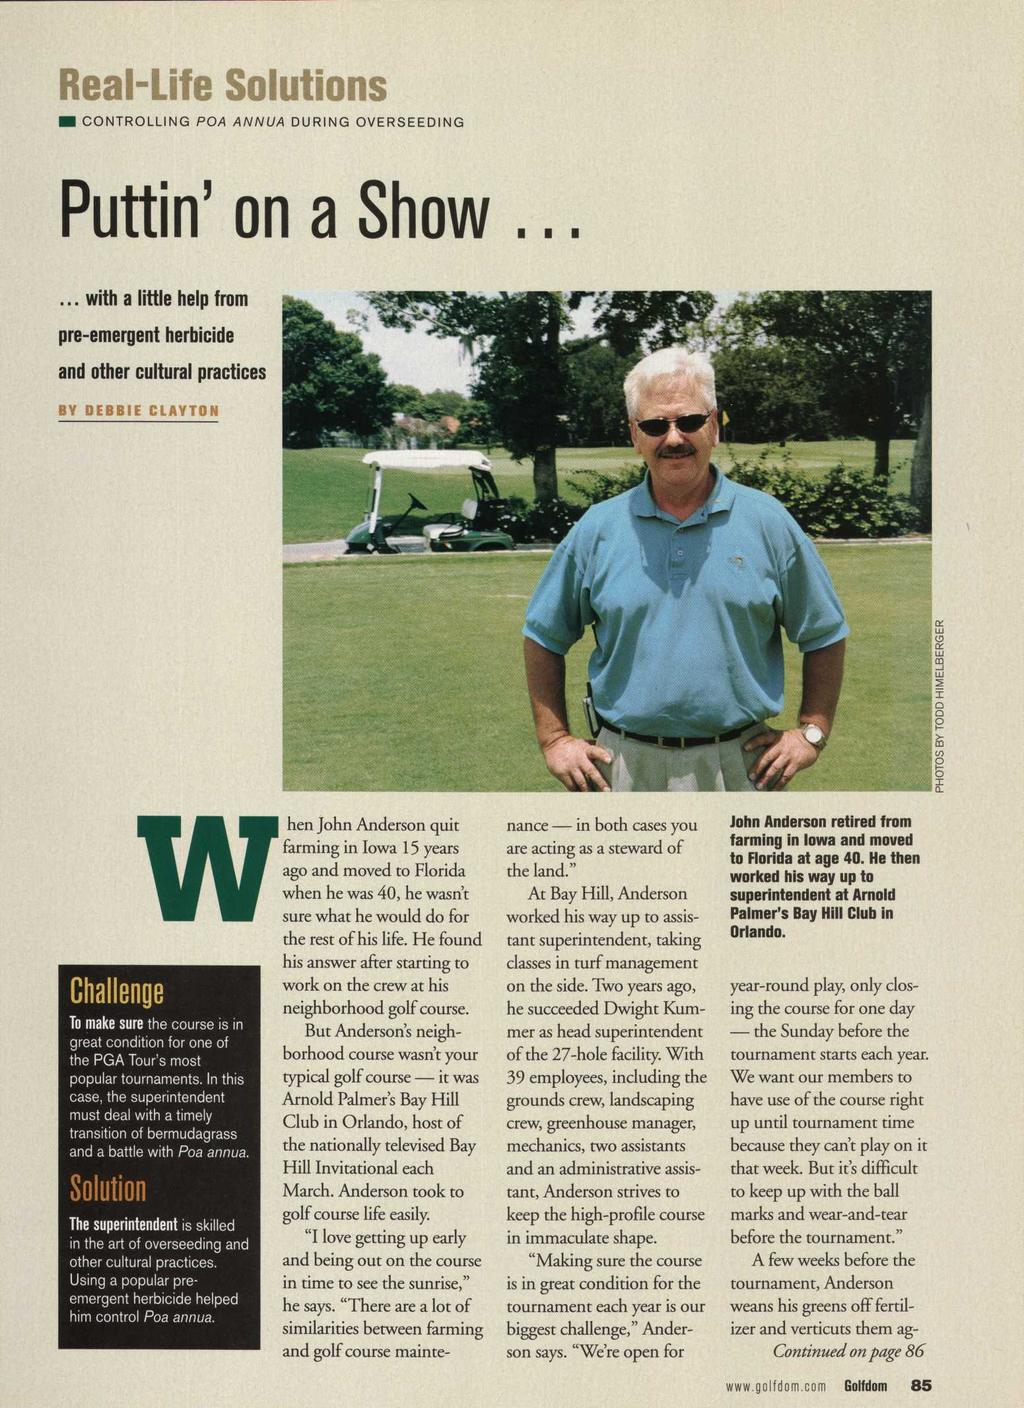 Real-Life Solutions I CONTROLLING POA ANNUA DURING OVERSEEDING Puttin' on a Show.